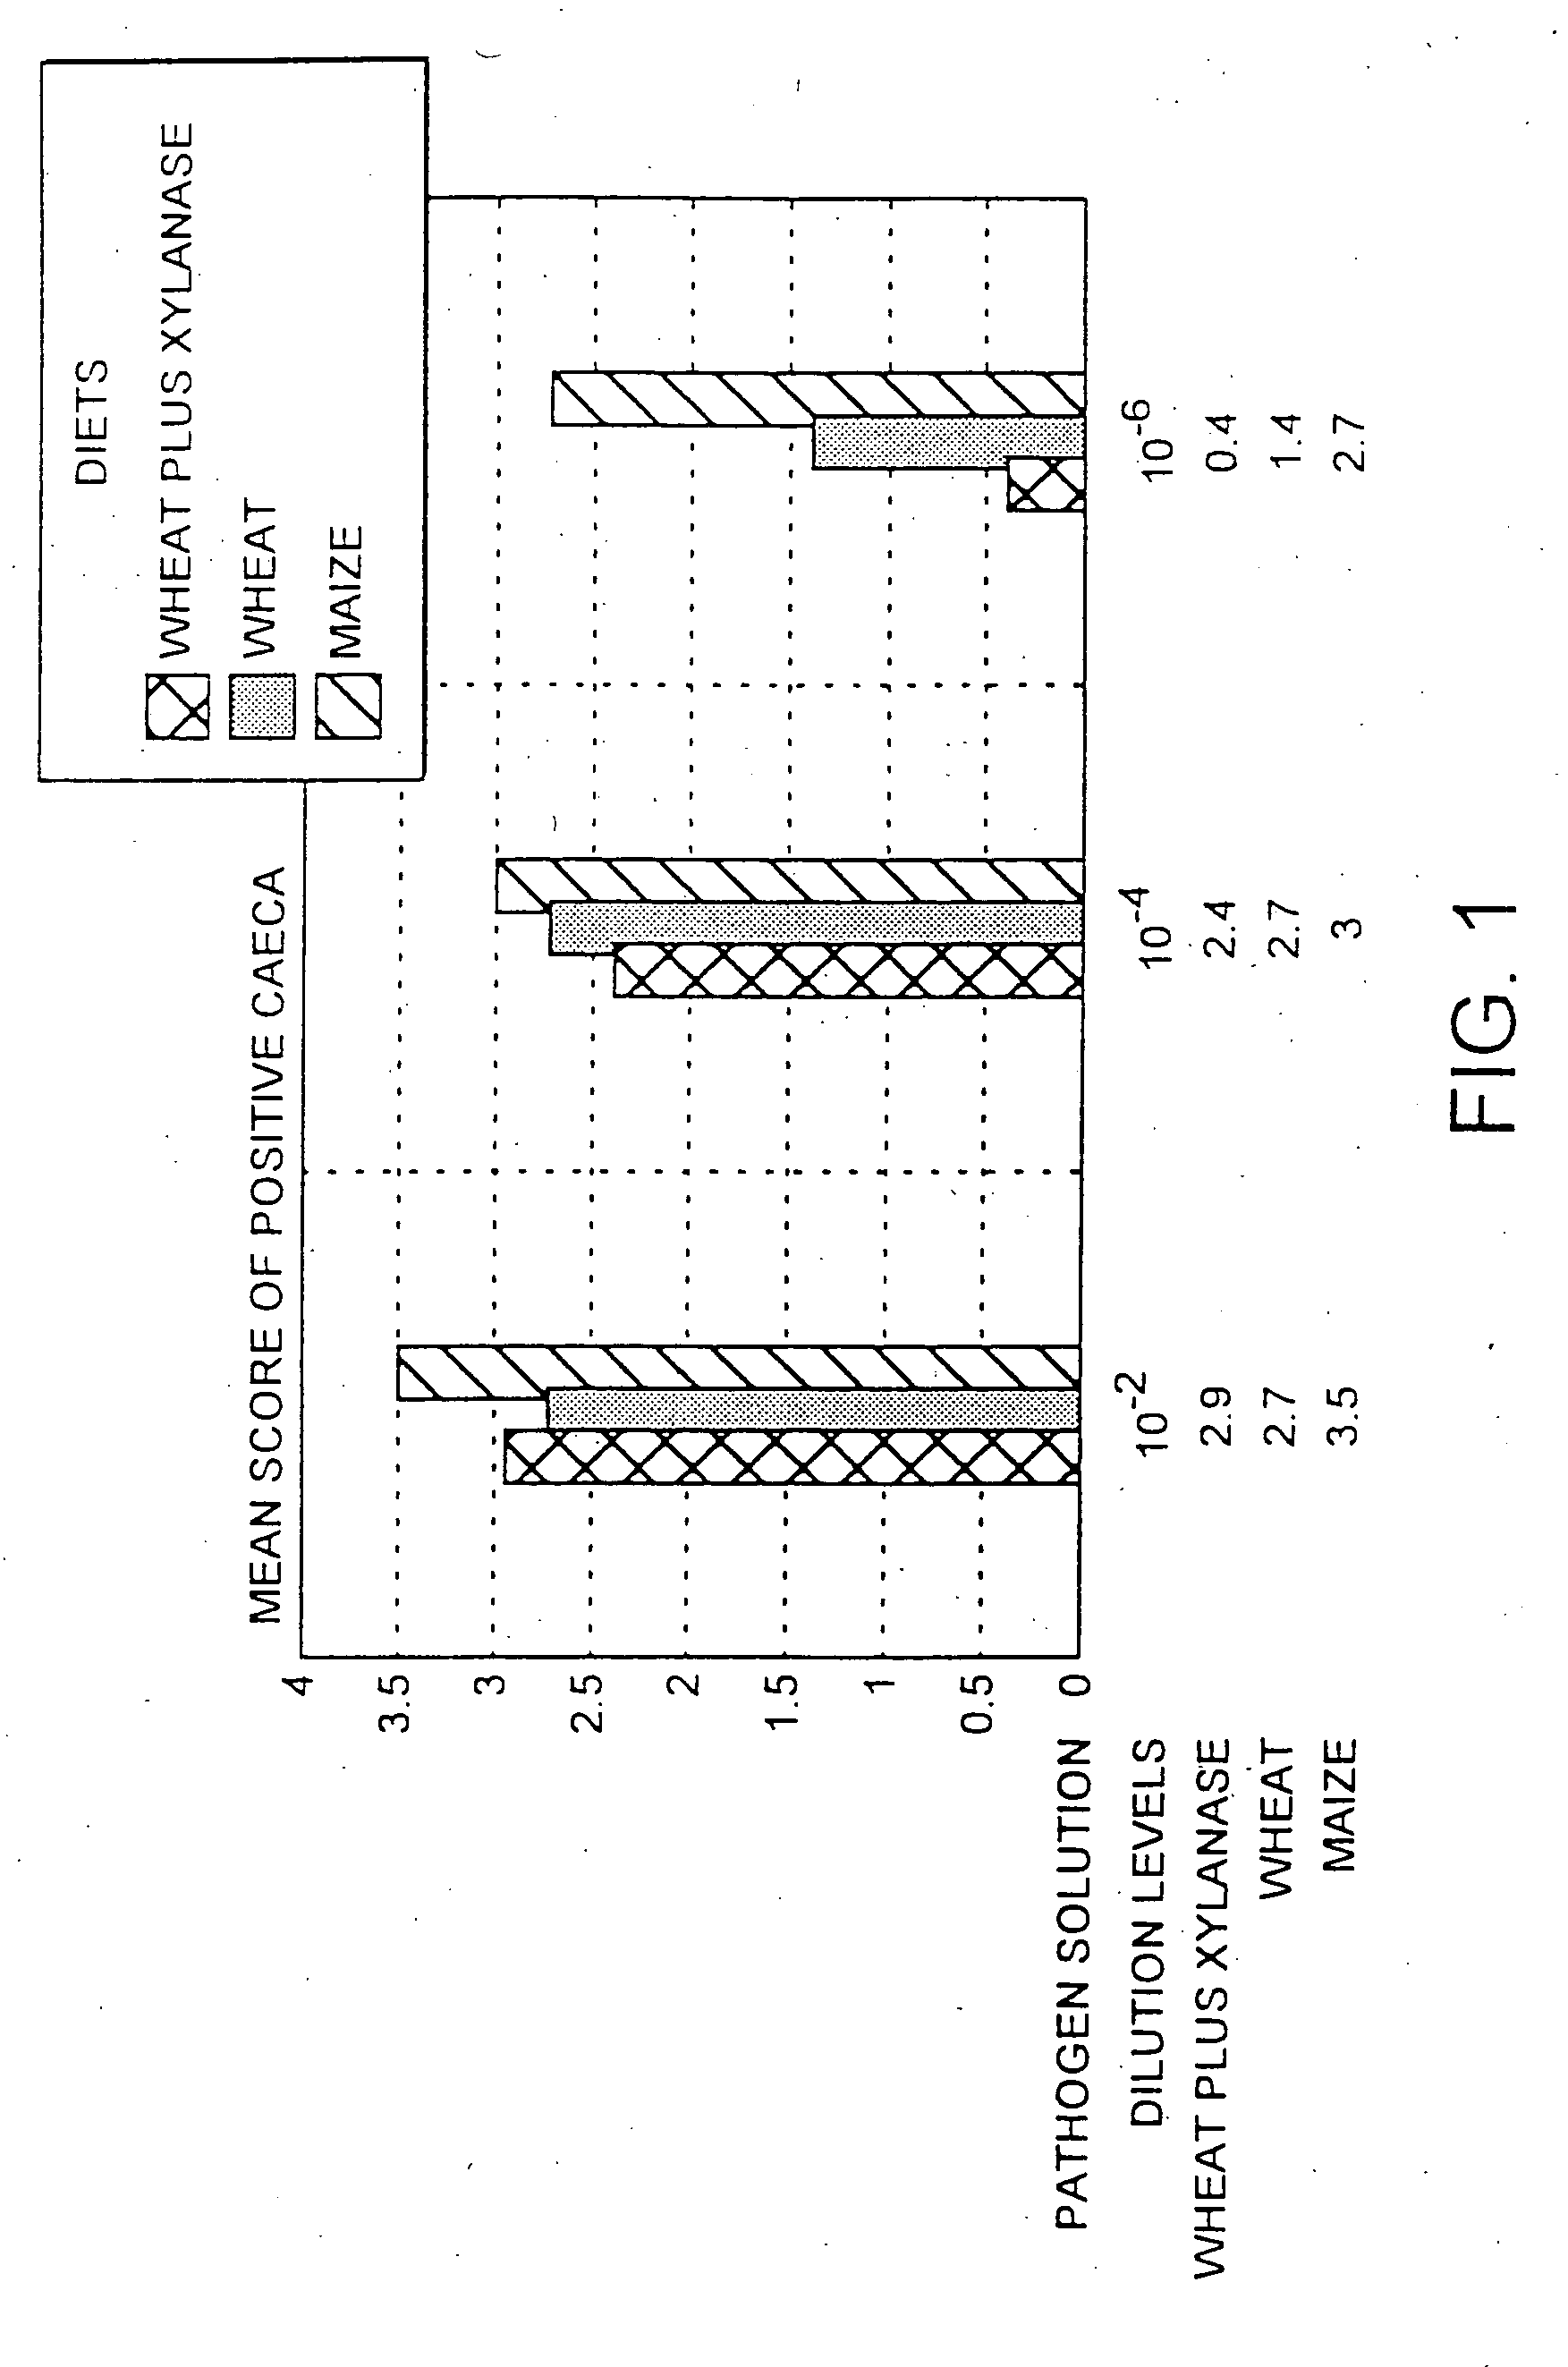 Use of an enzyme for the manufacture of an agent for controlling bacterial infection